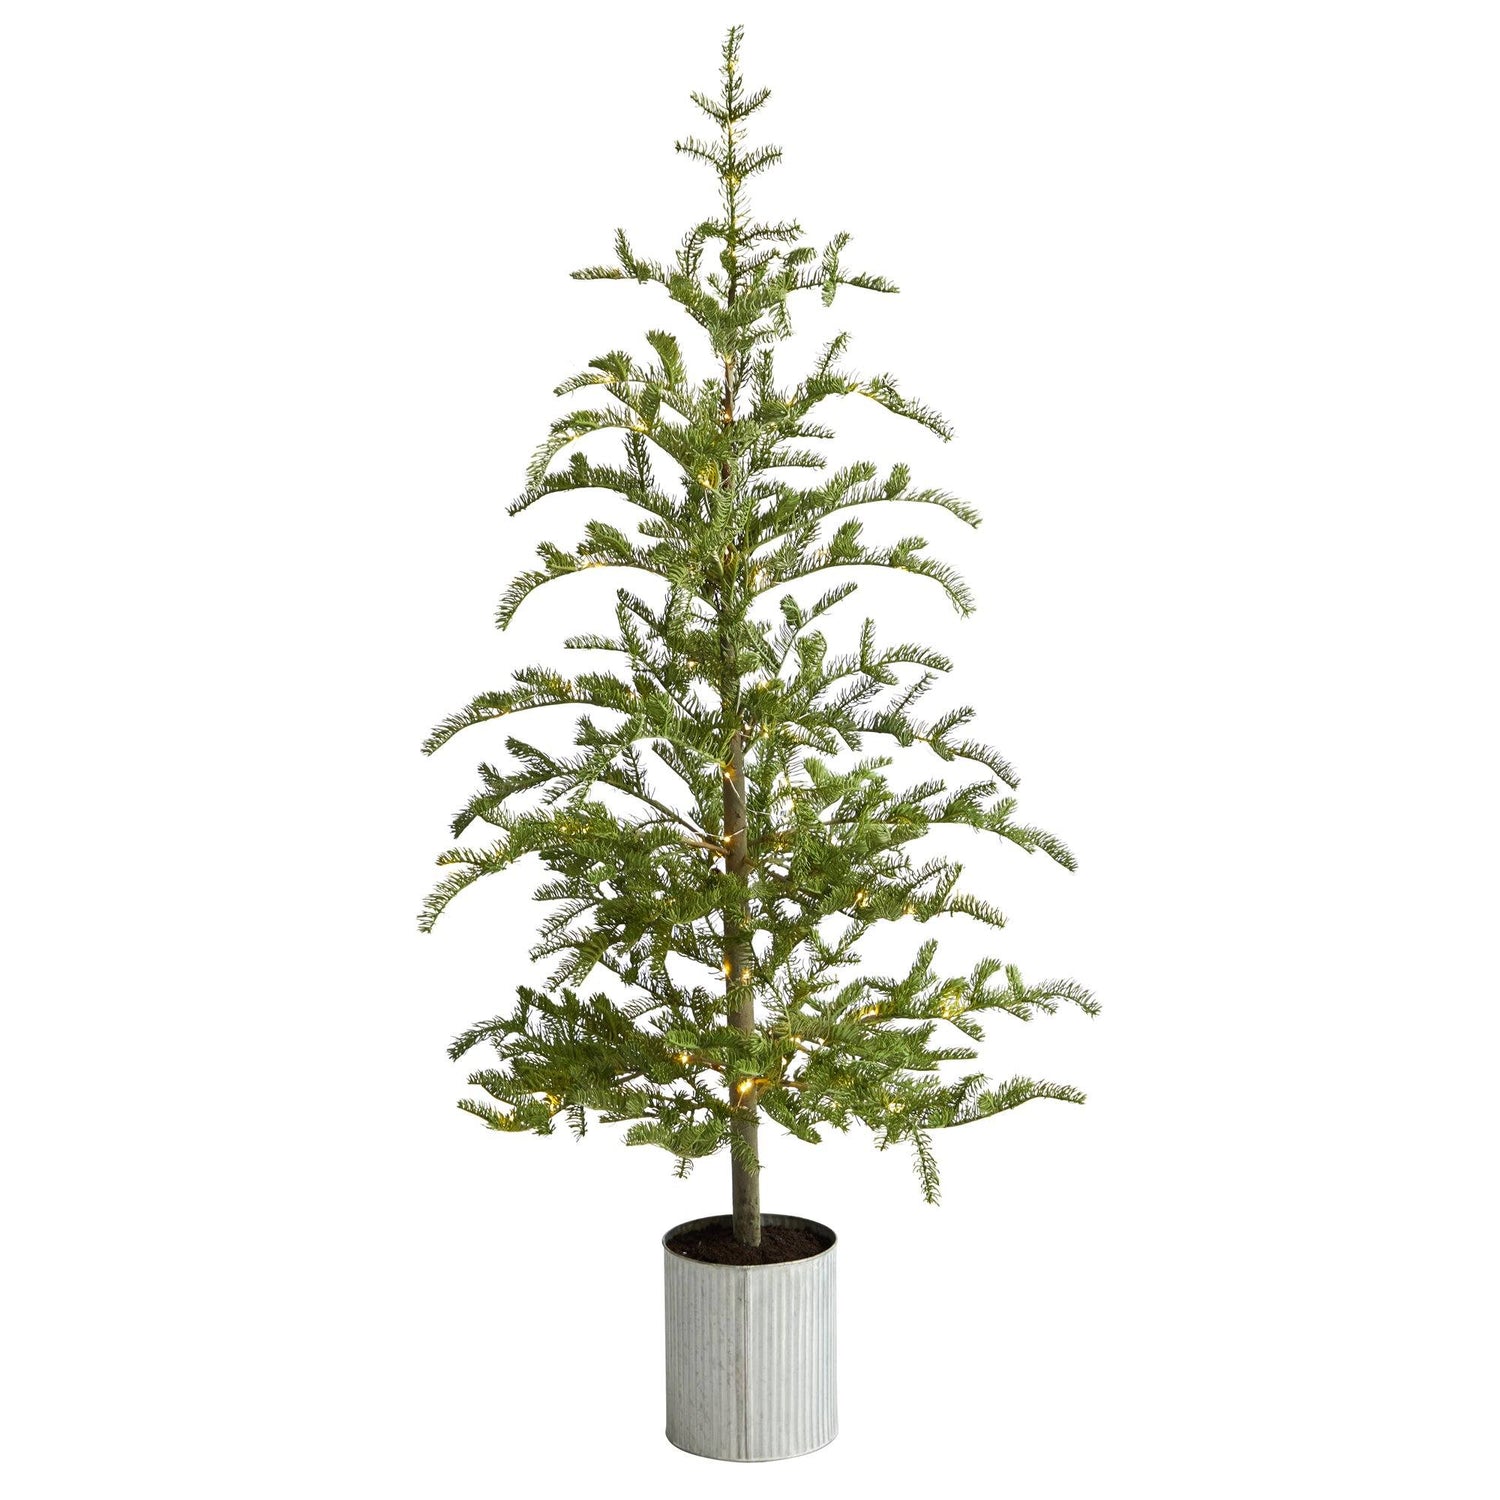 5.5’ Pre-Lit Pine Artificial Christmas Tree in Decorative Planter with 150 Lights